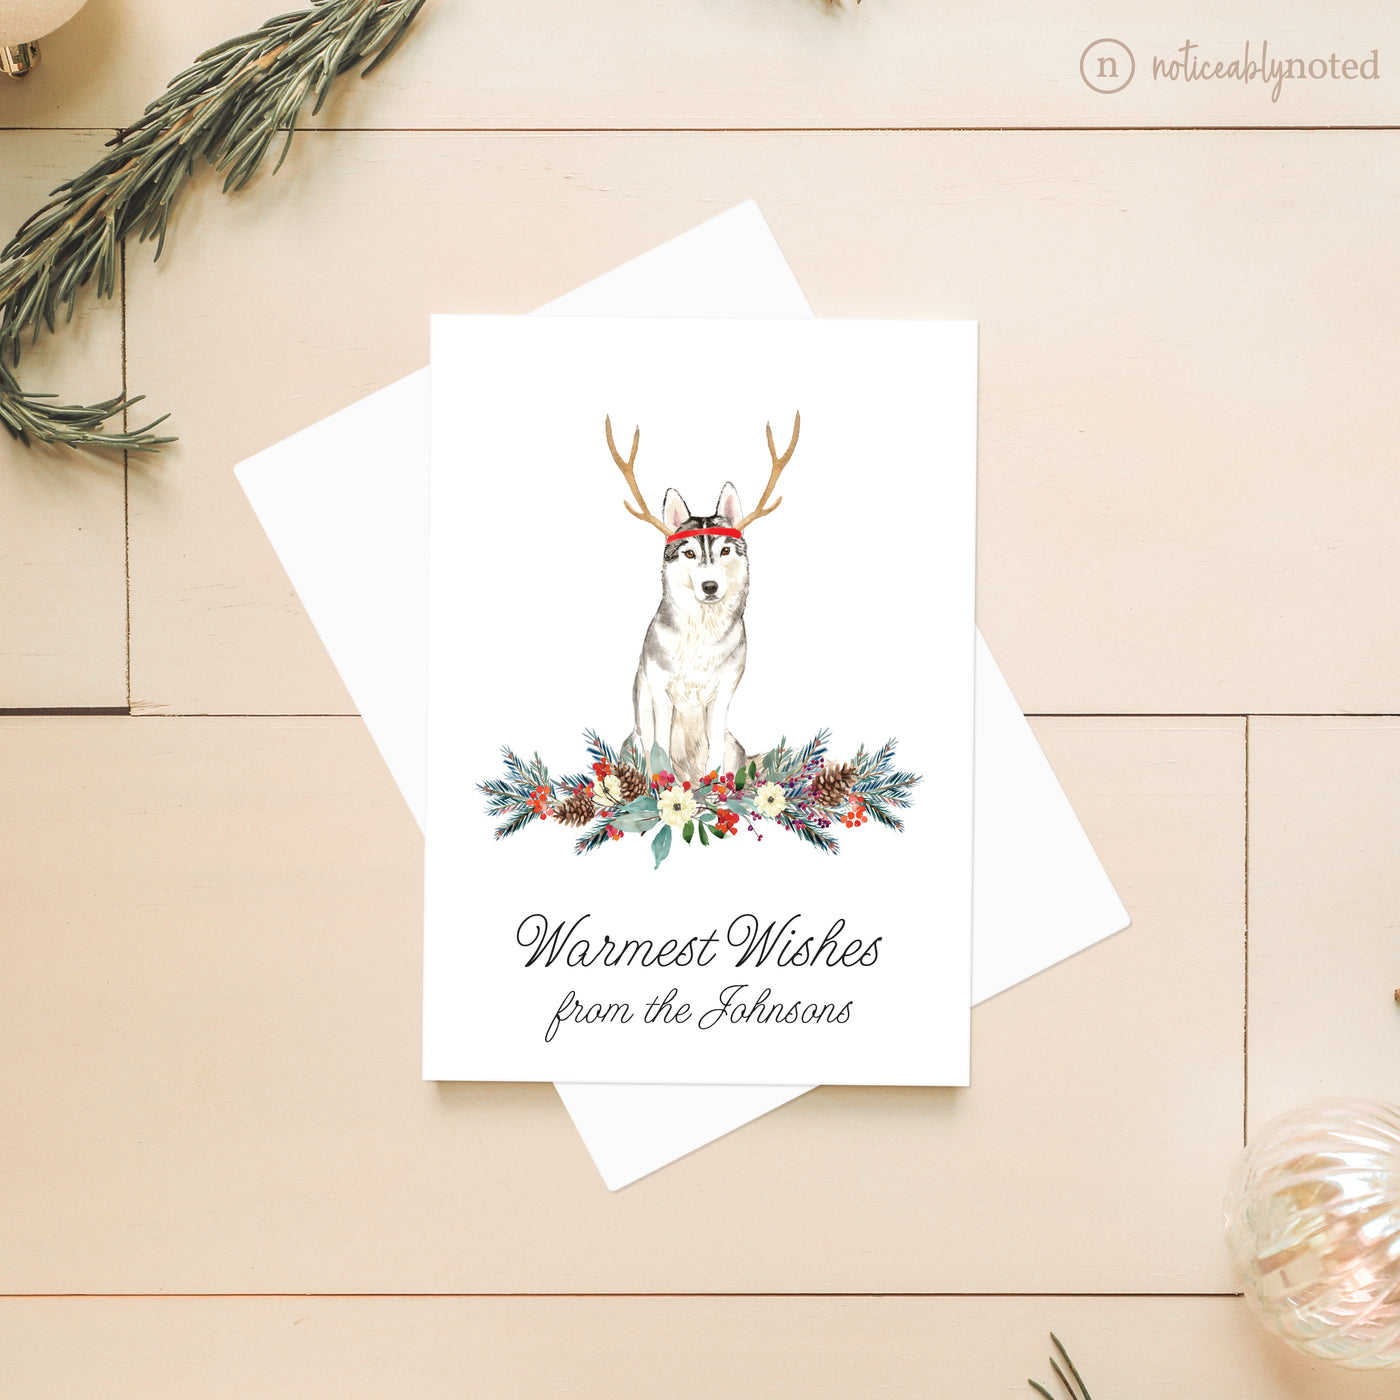 Siberian Husky Christmas Cards | Noticeably Noted